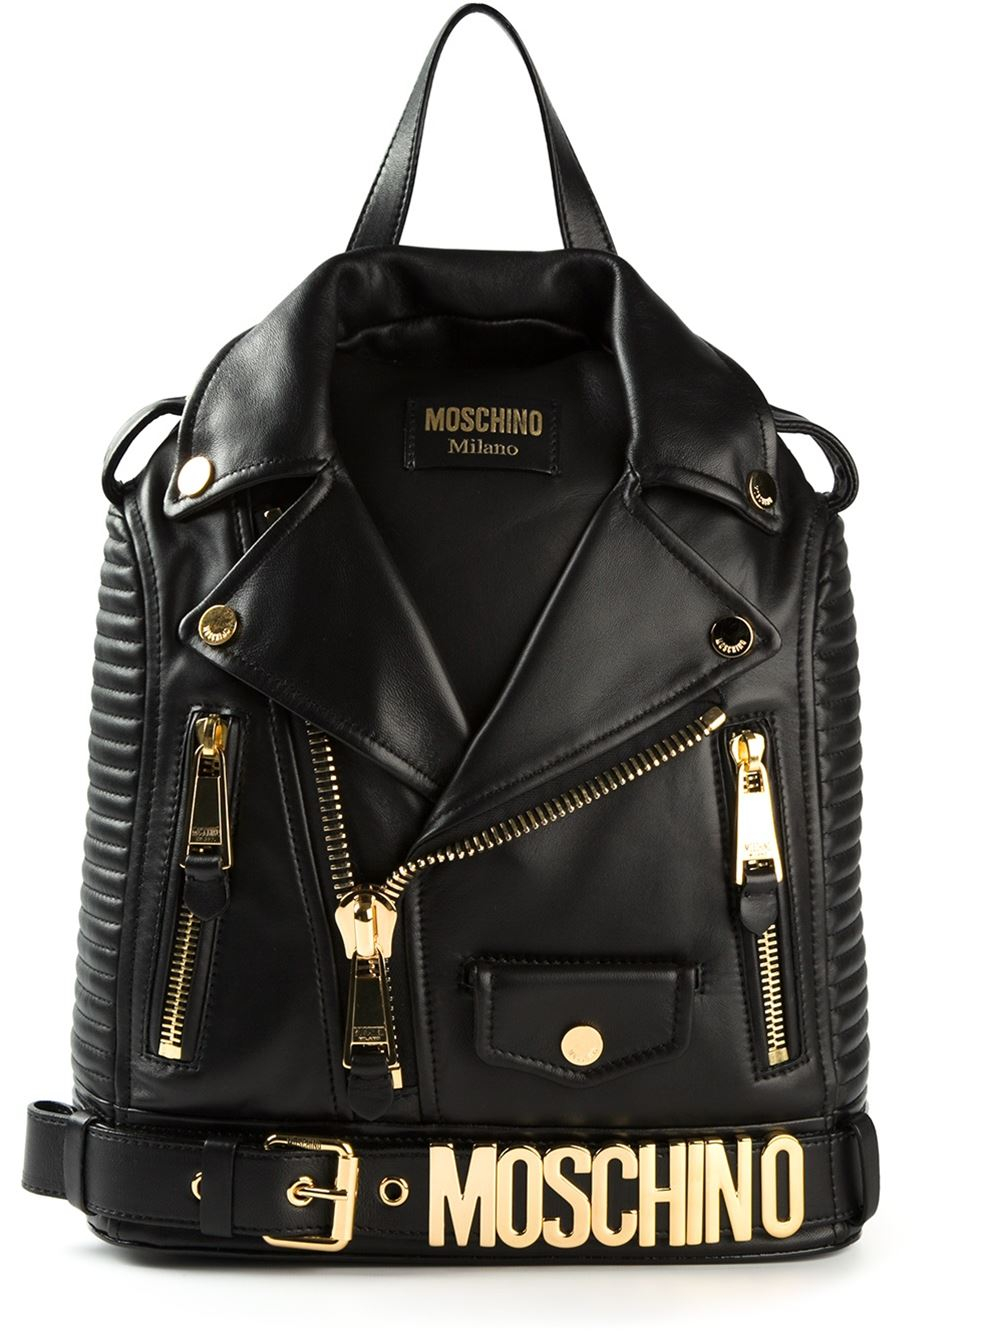 Moschino Biker Jacket Style Backpack in Black | Lyst